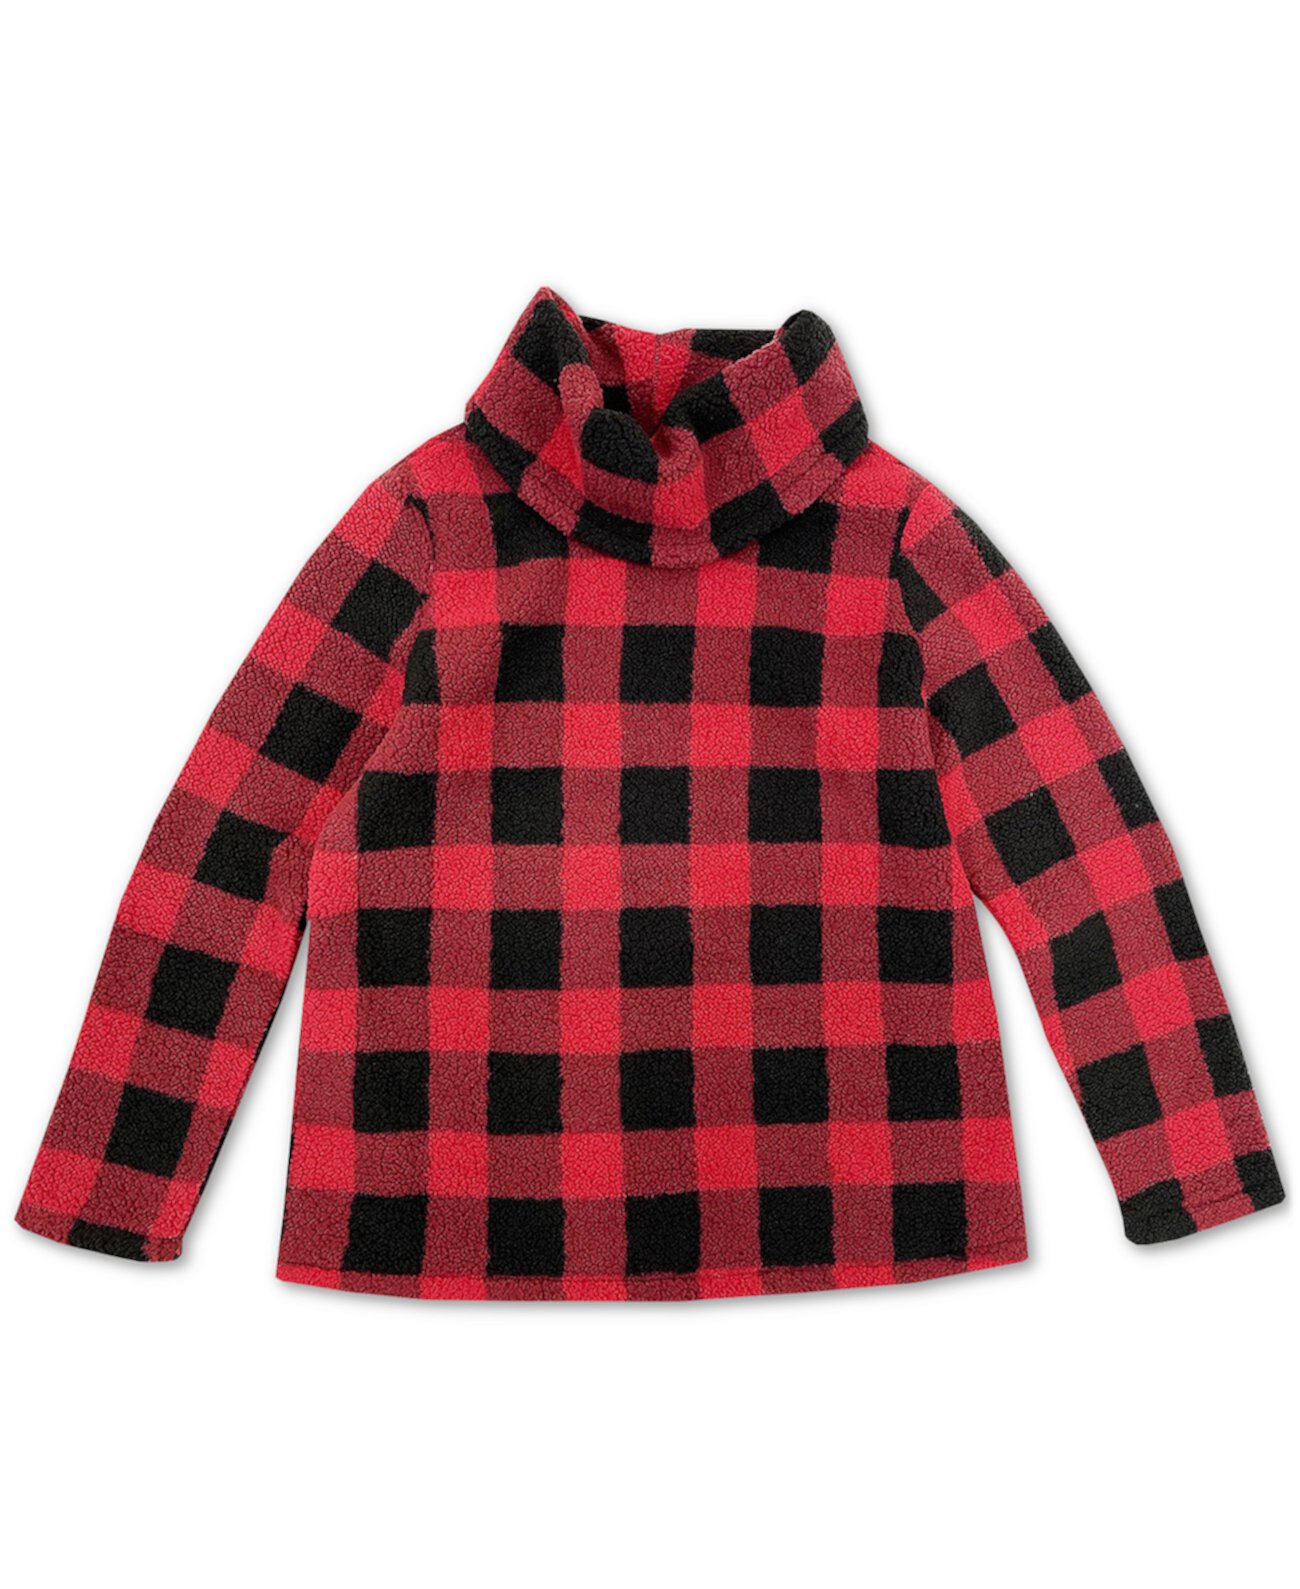 Checked Cowlneck Sweatshirt, Created for Macy's Style & Co